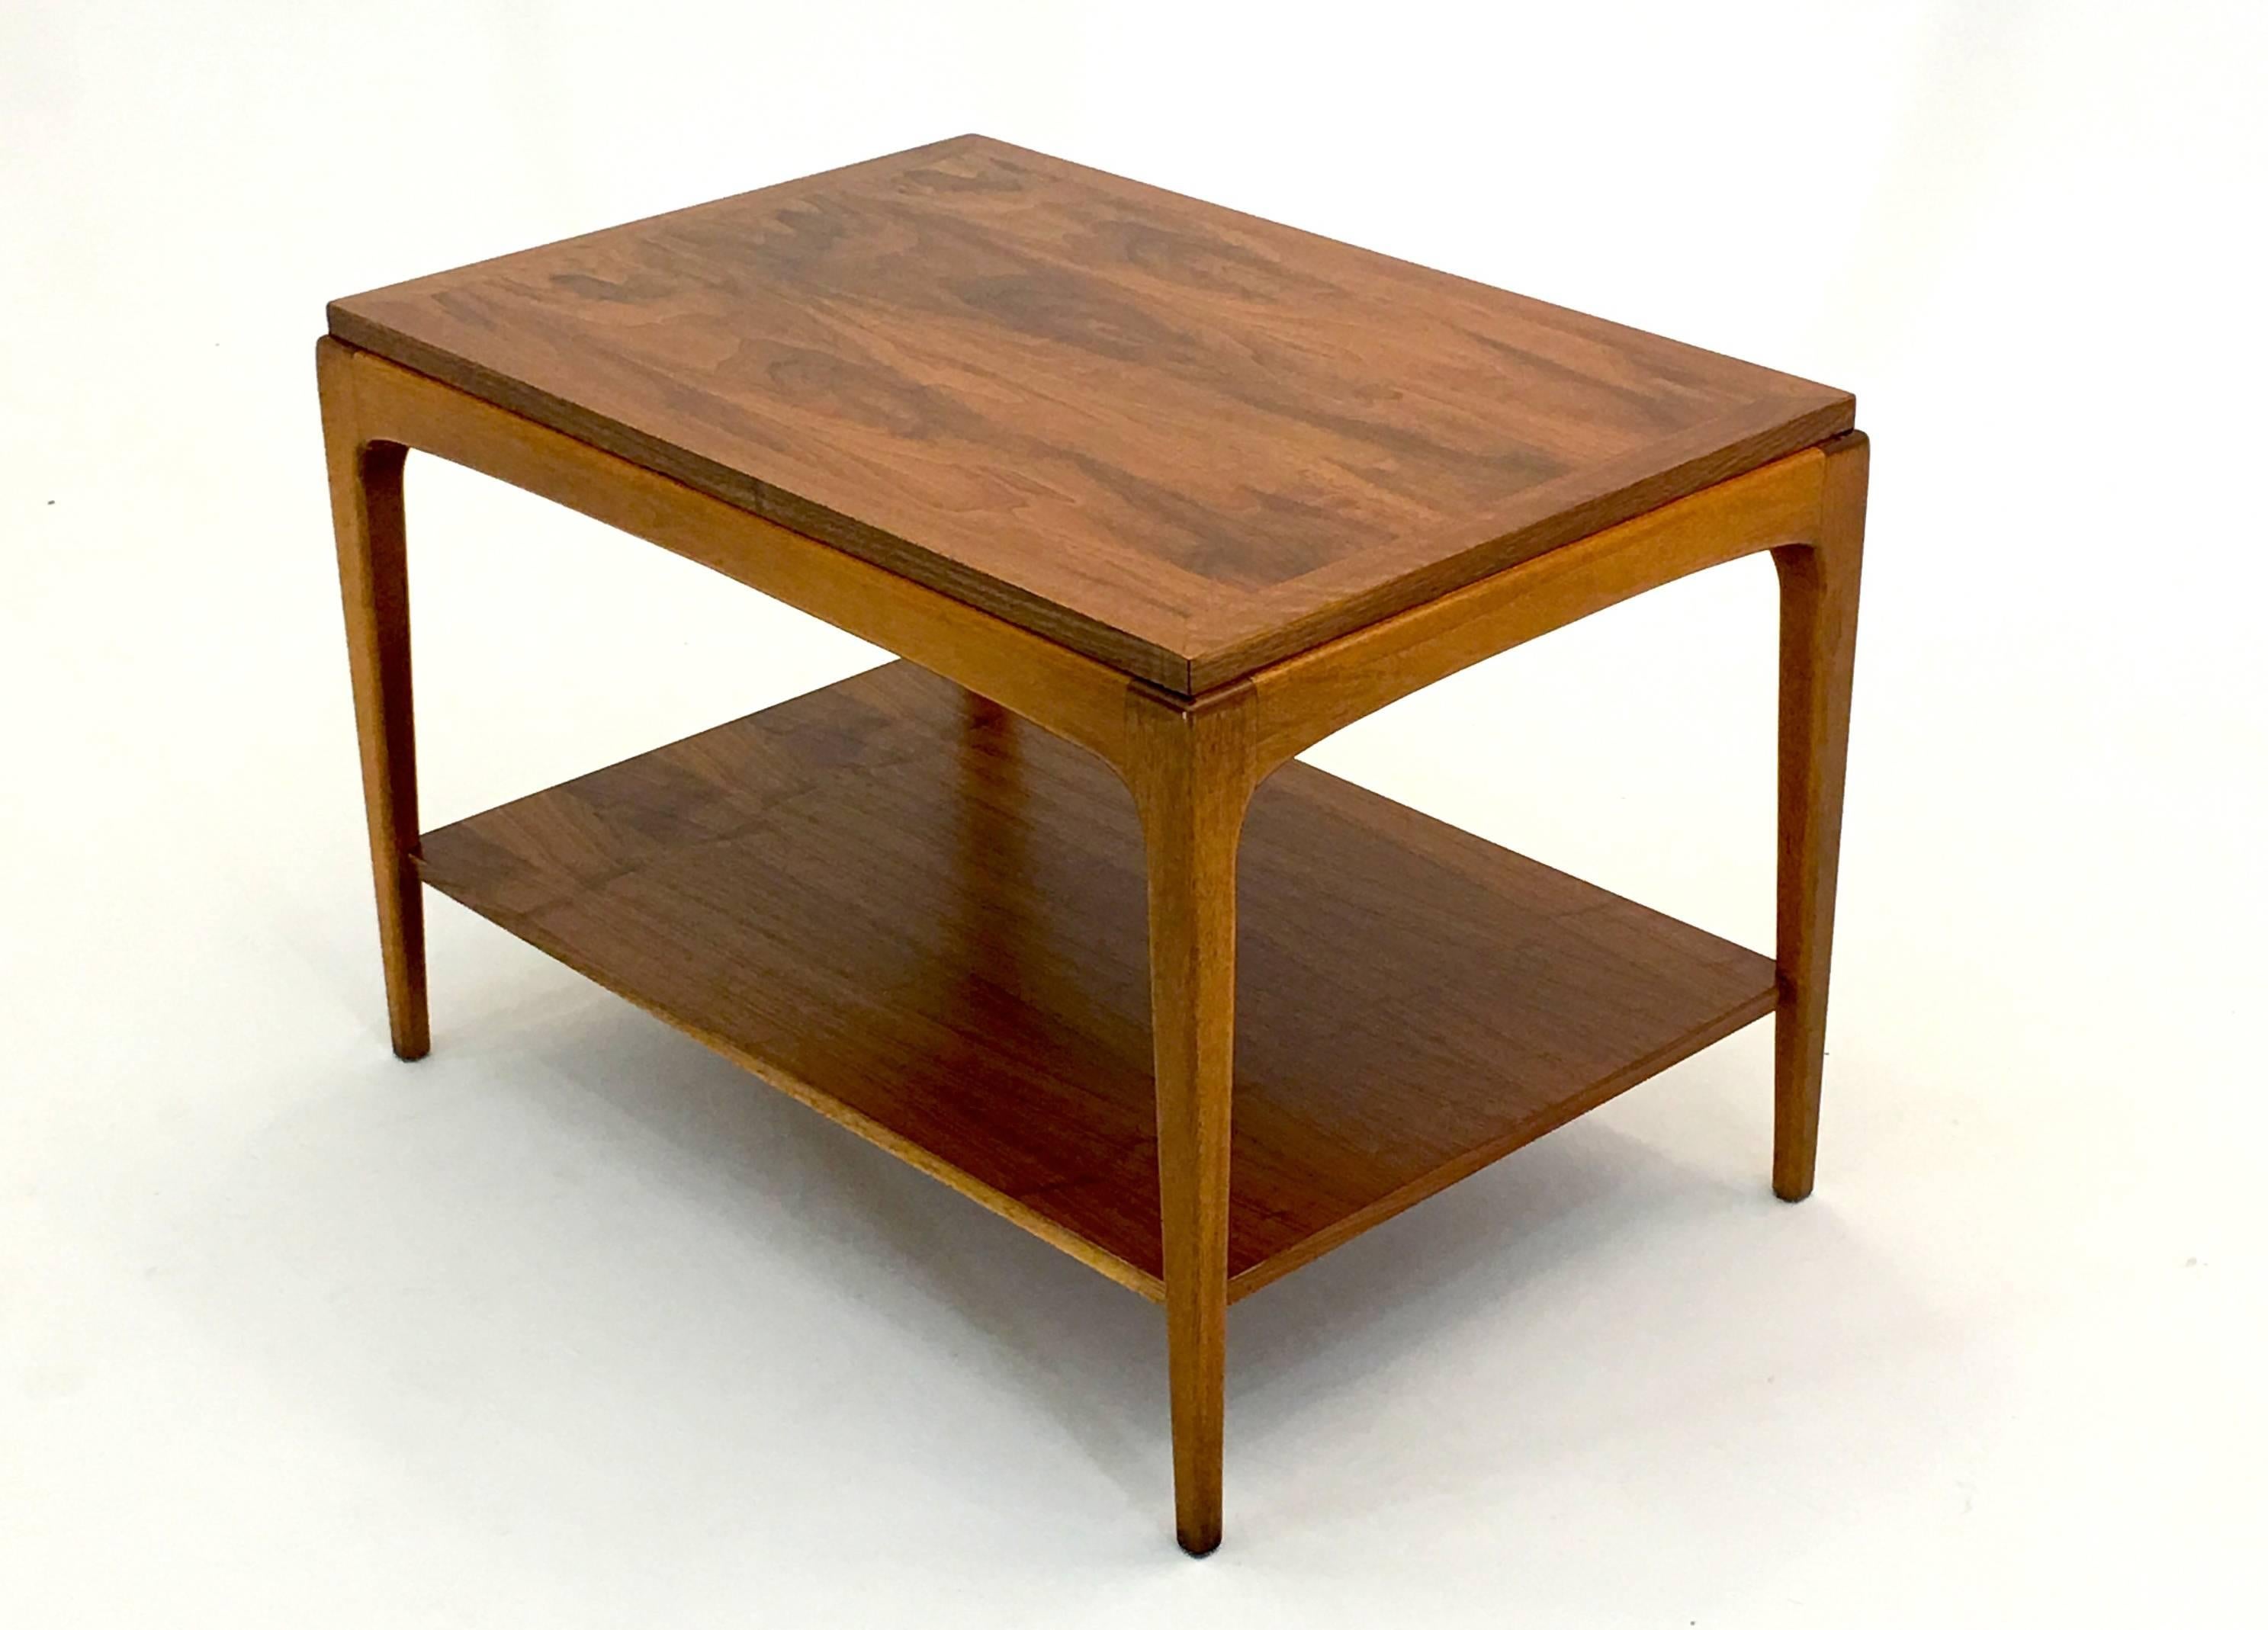 Mid-20th Century Three-Piece Living Suite of Tables by Lane in Walnut, 1966